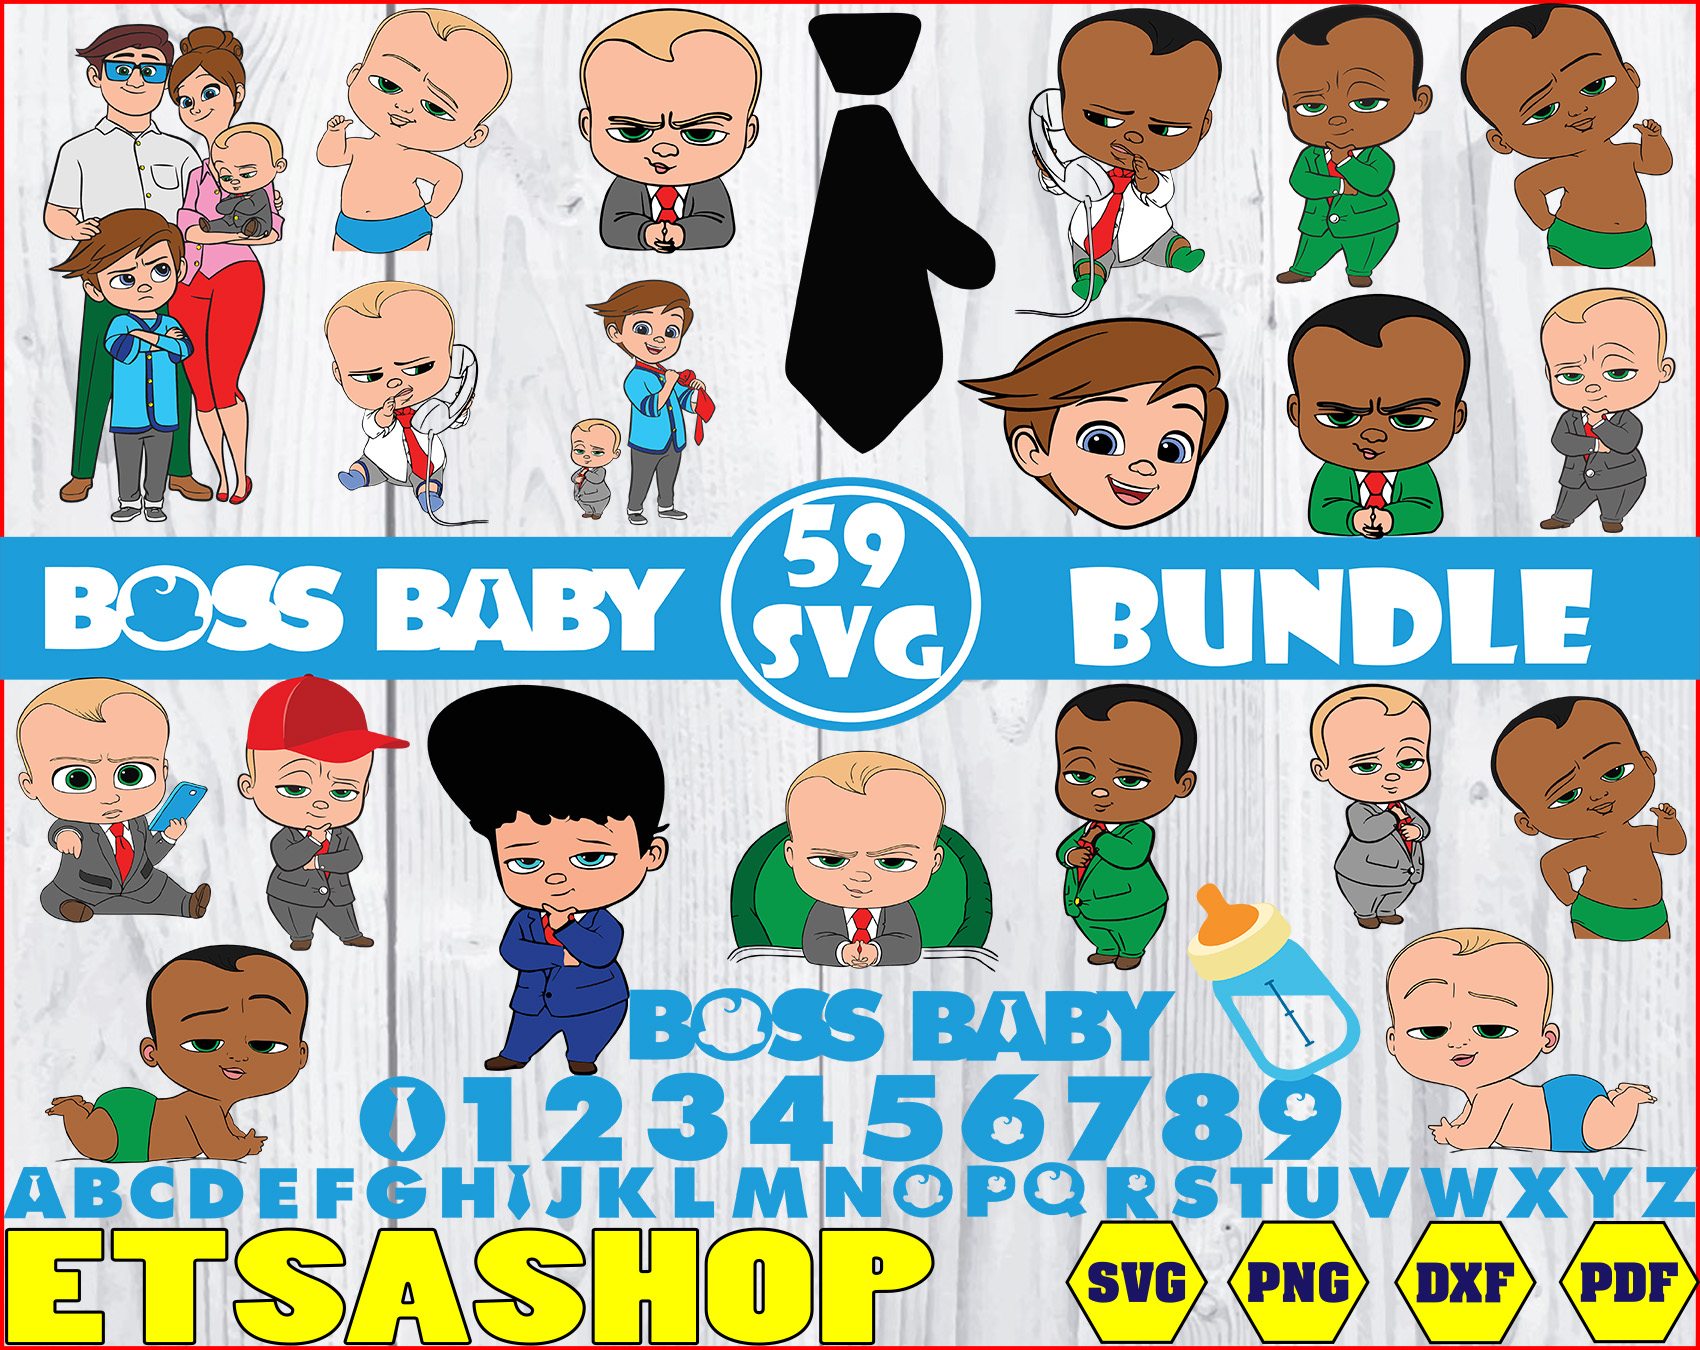 The Boss Baby Svg Bundle Cut Files The Boss Baby Logo Svg The Boss Baby Clipart Cricut Clipart Digital Download Outstanding And Different